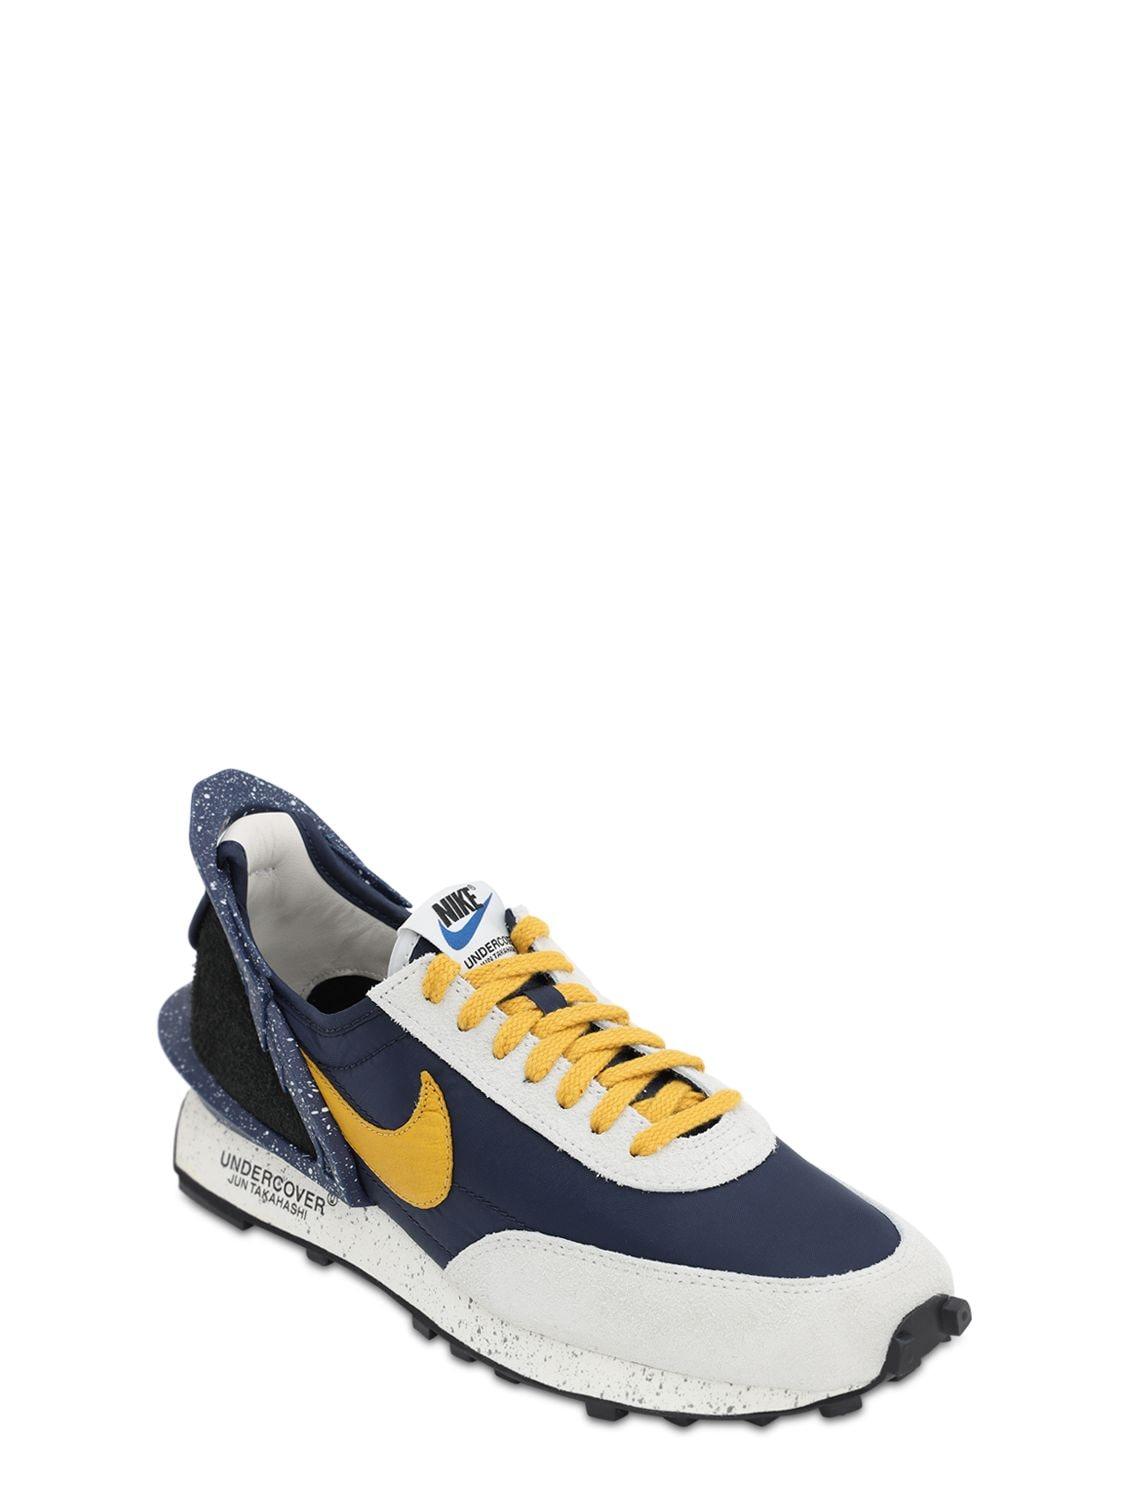 Nike Synthetic Daybreak / Undercover Sneakers in Blue/Gold (Blue) | Lyst